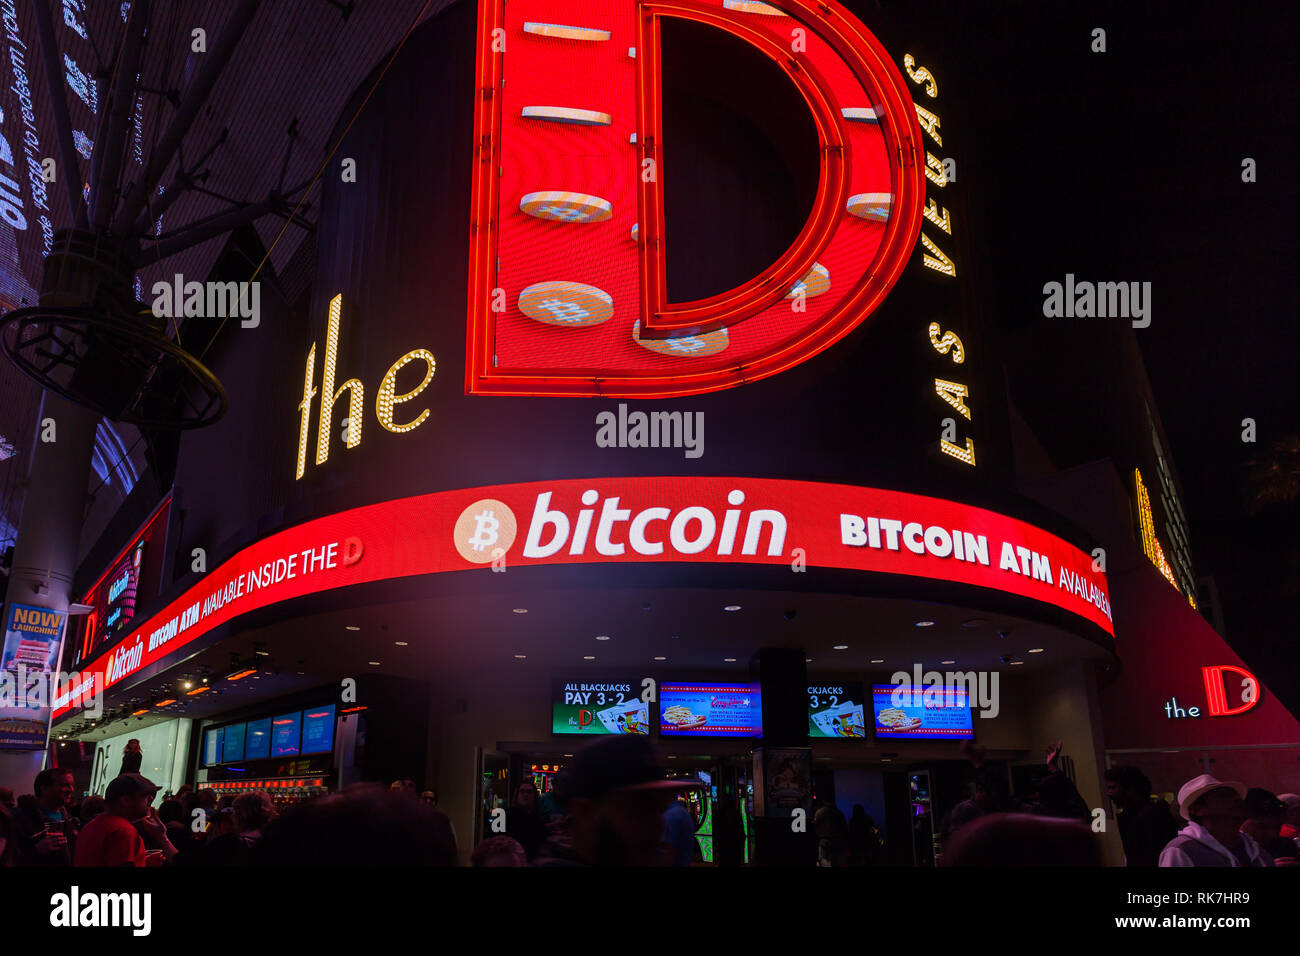 Atm Las Vegas High Resolution Stock Photography and Images - Alamy